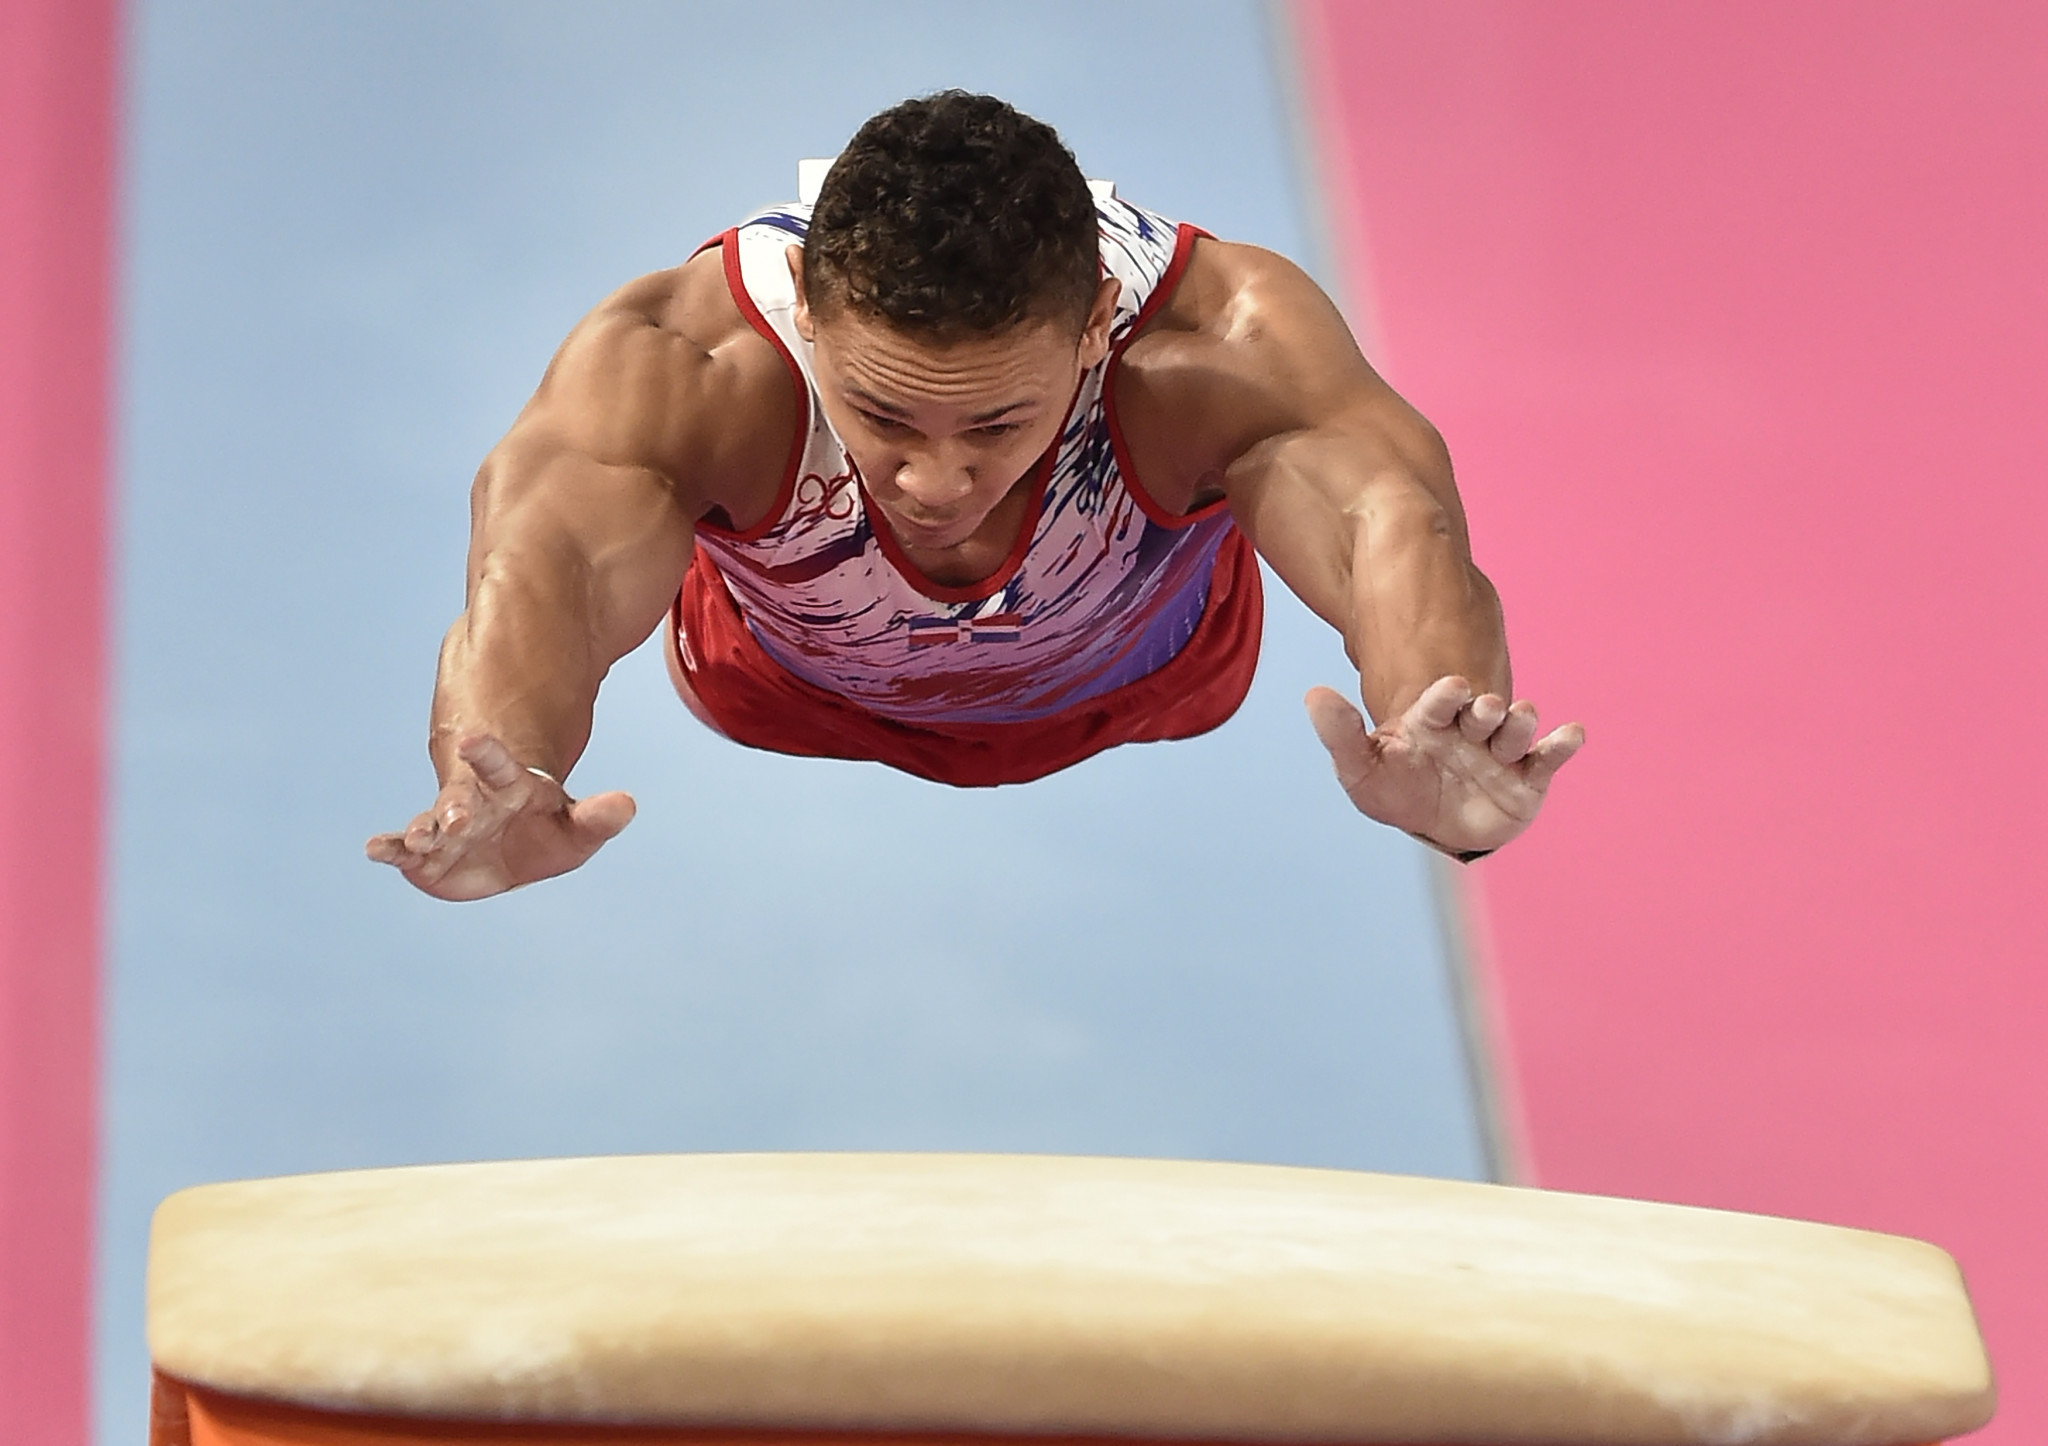 Audrys Nin won gold in the men's vault event ©Getty Images